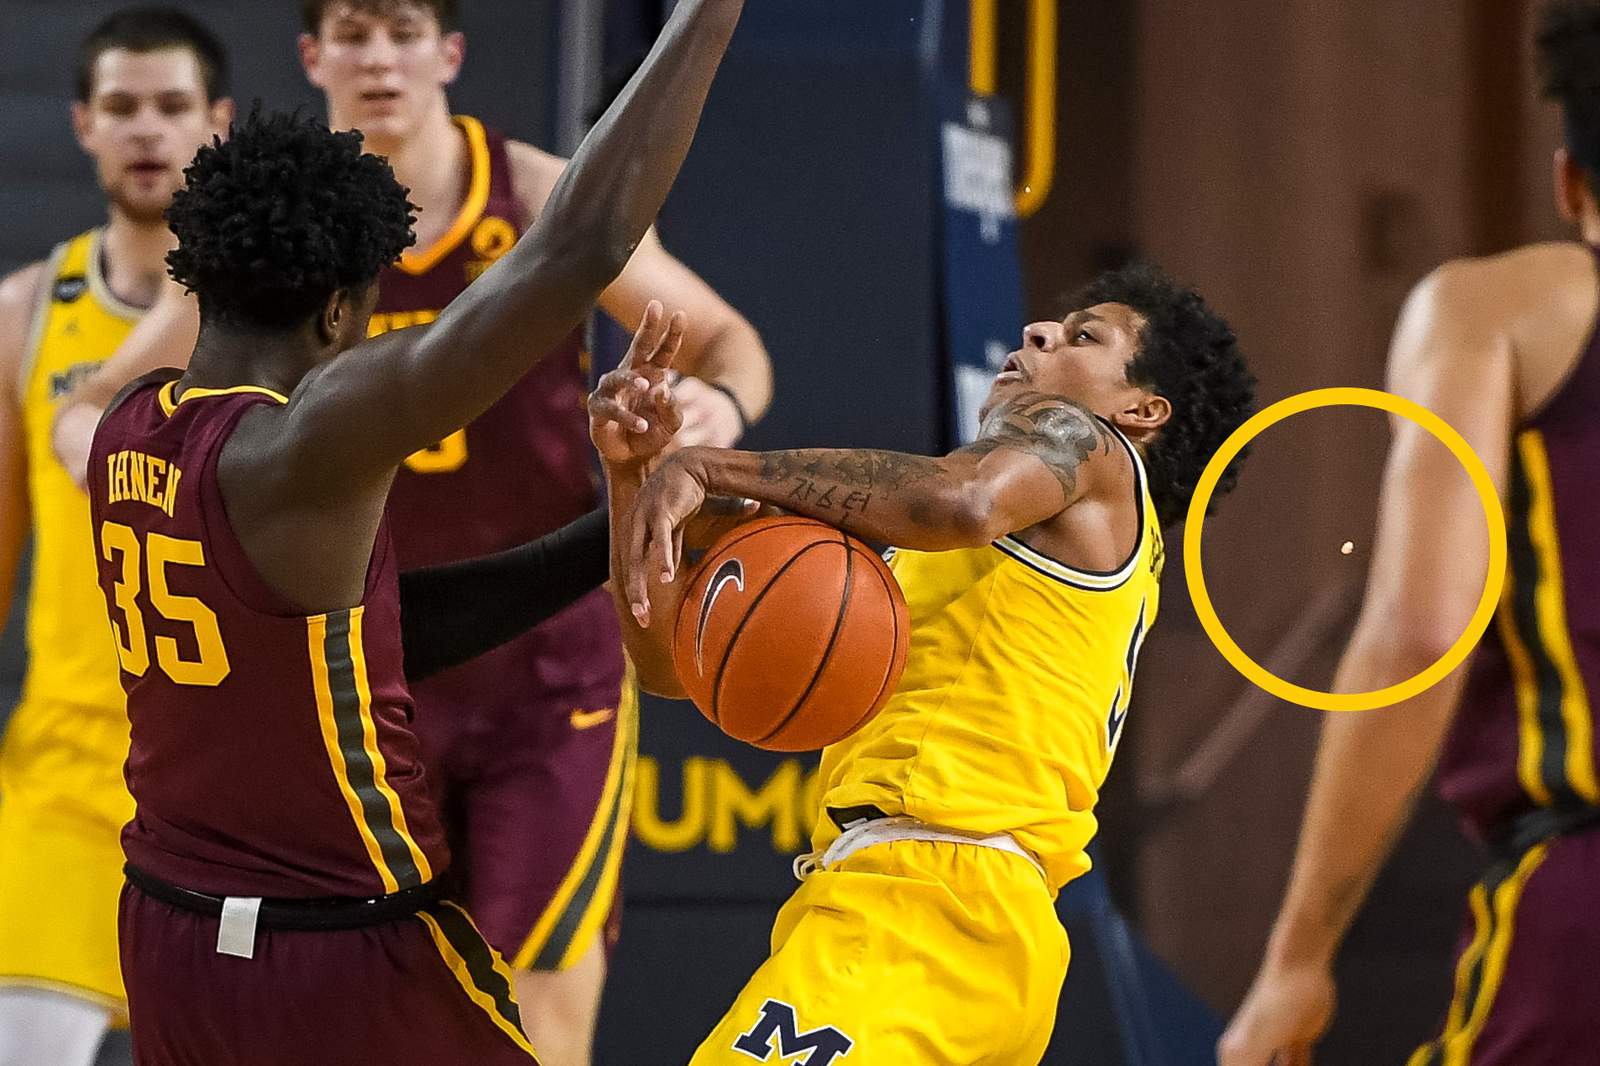 Watch: Eli Brooks has tooth knocked out during Michigan basketball’s win over Minnesota